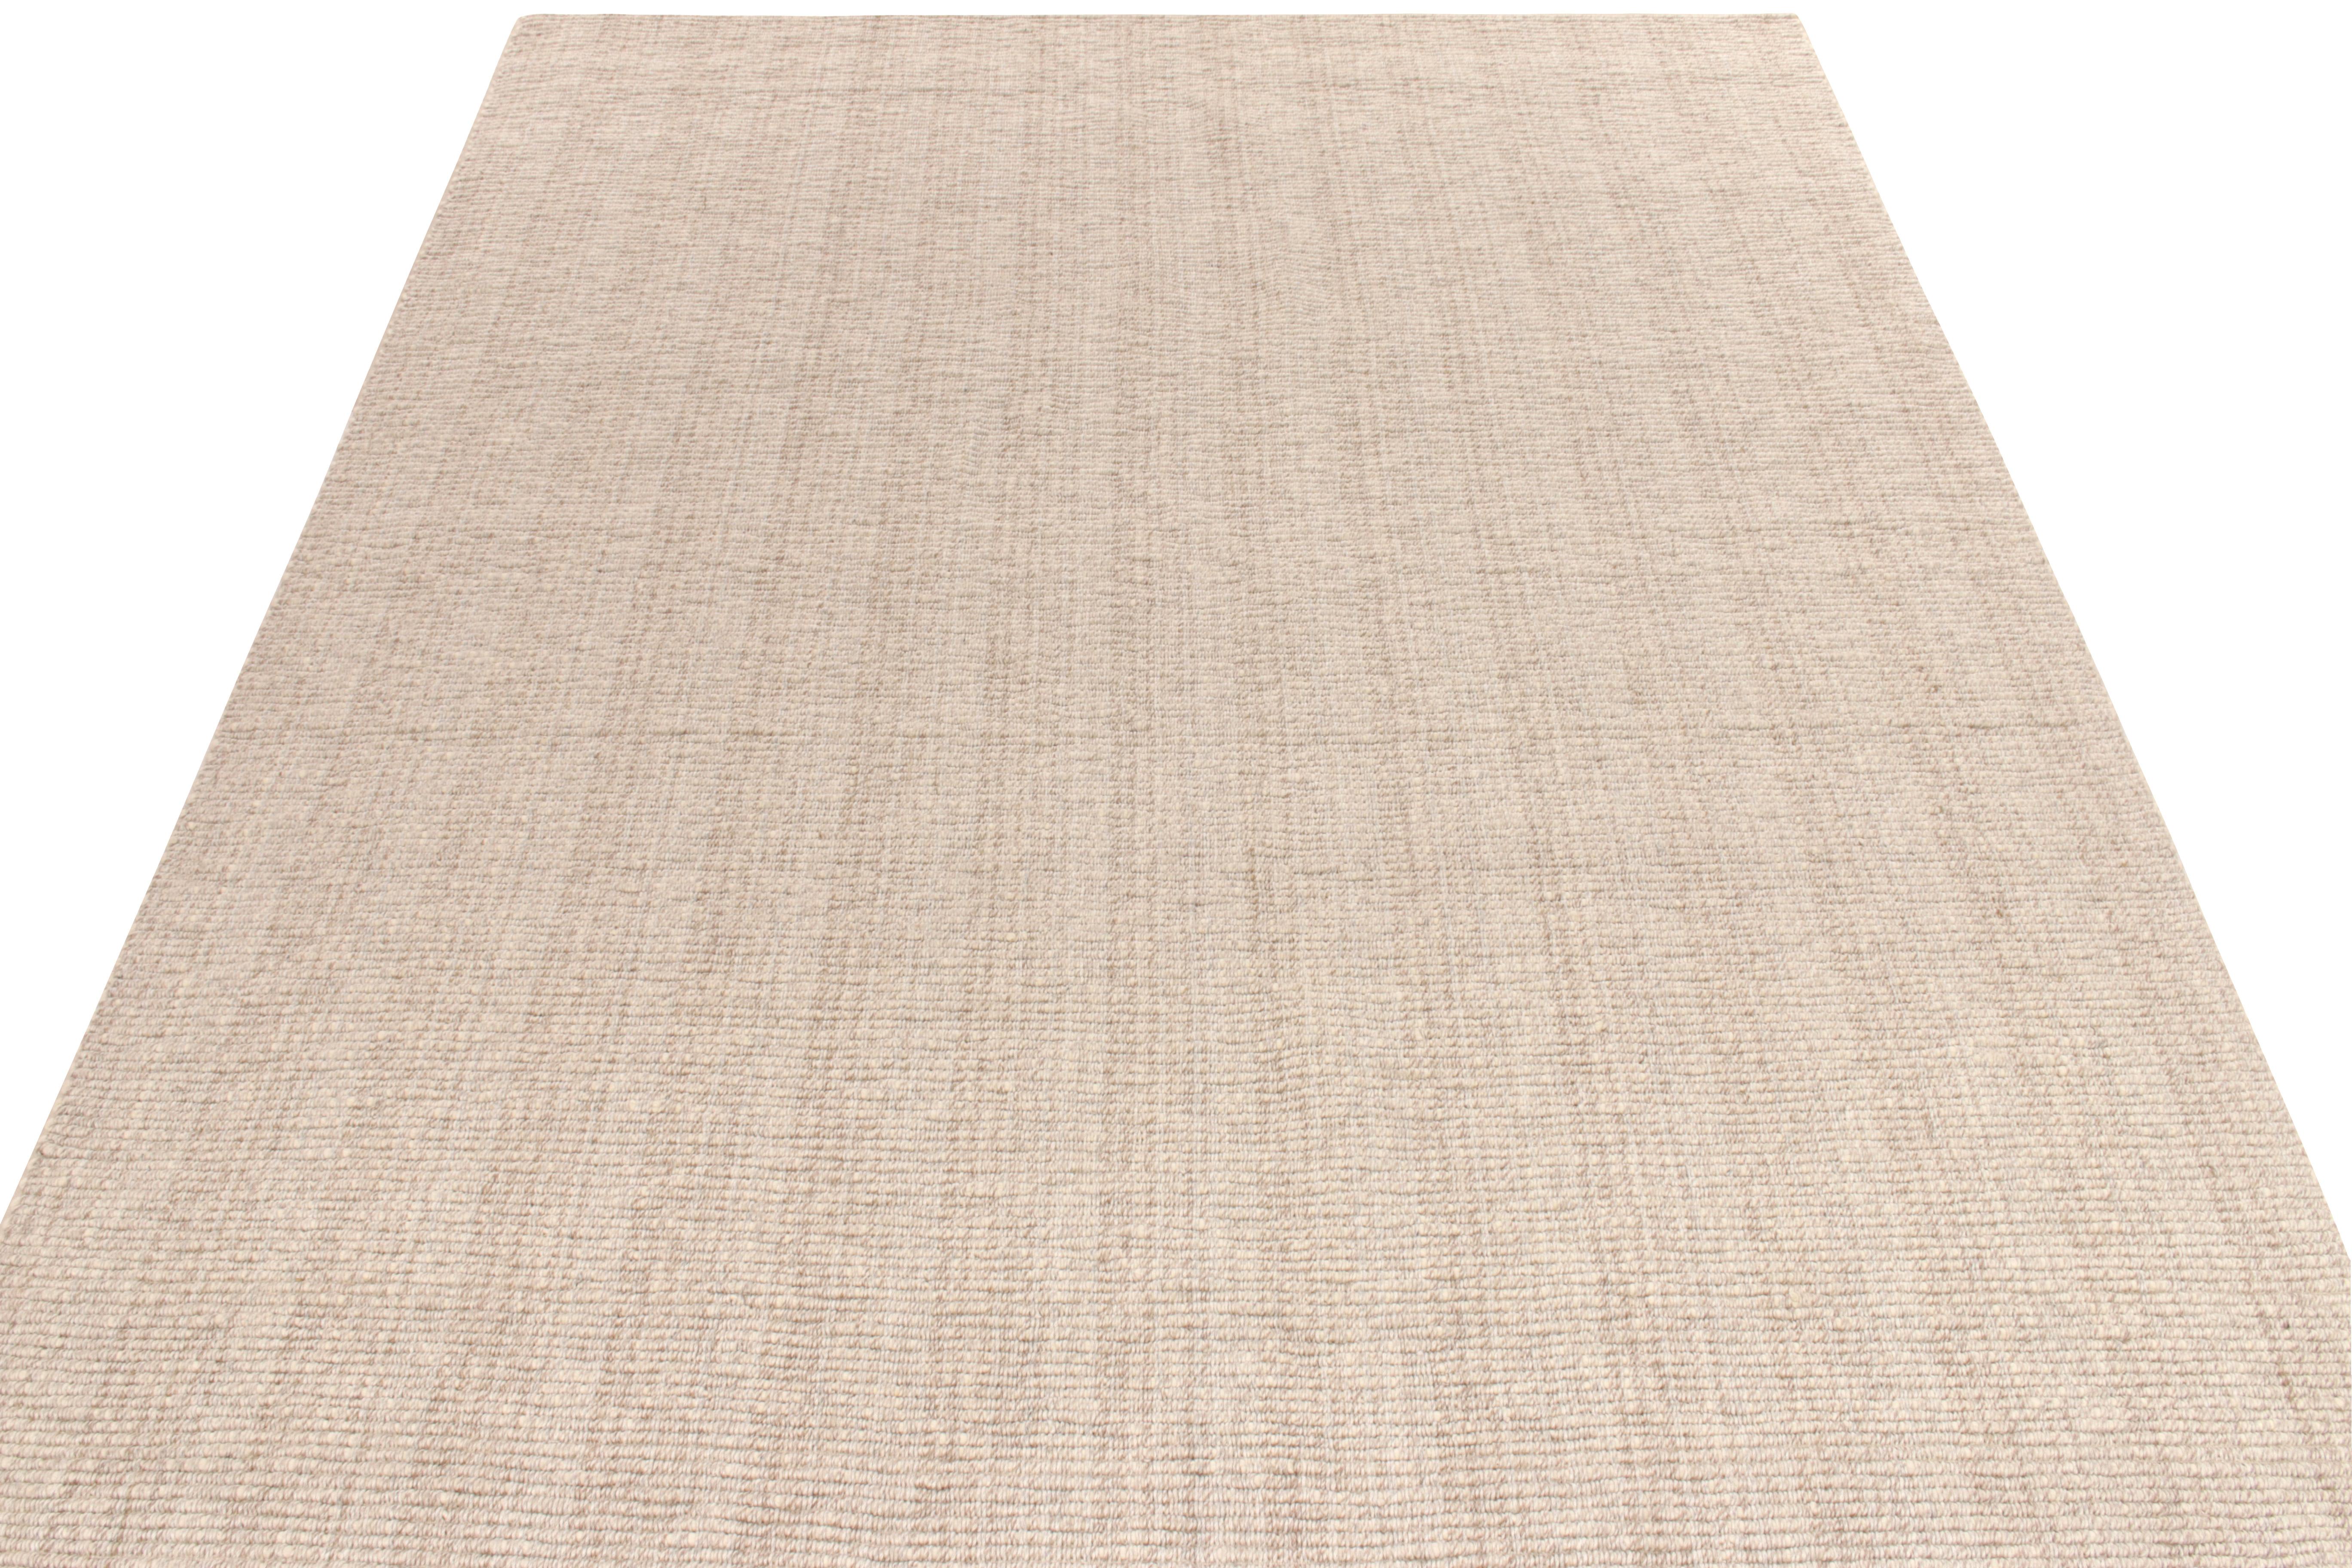 Handwoven in wool, a custom flatweave rug design available from our Kilim & Flatweave collection enjoying striations in beige & brown for a distinctive take in contemporary style. Exemplified in this 9x12 carrying structural strength & signature